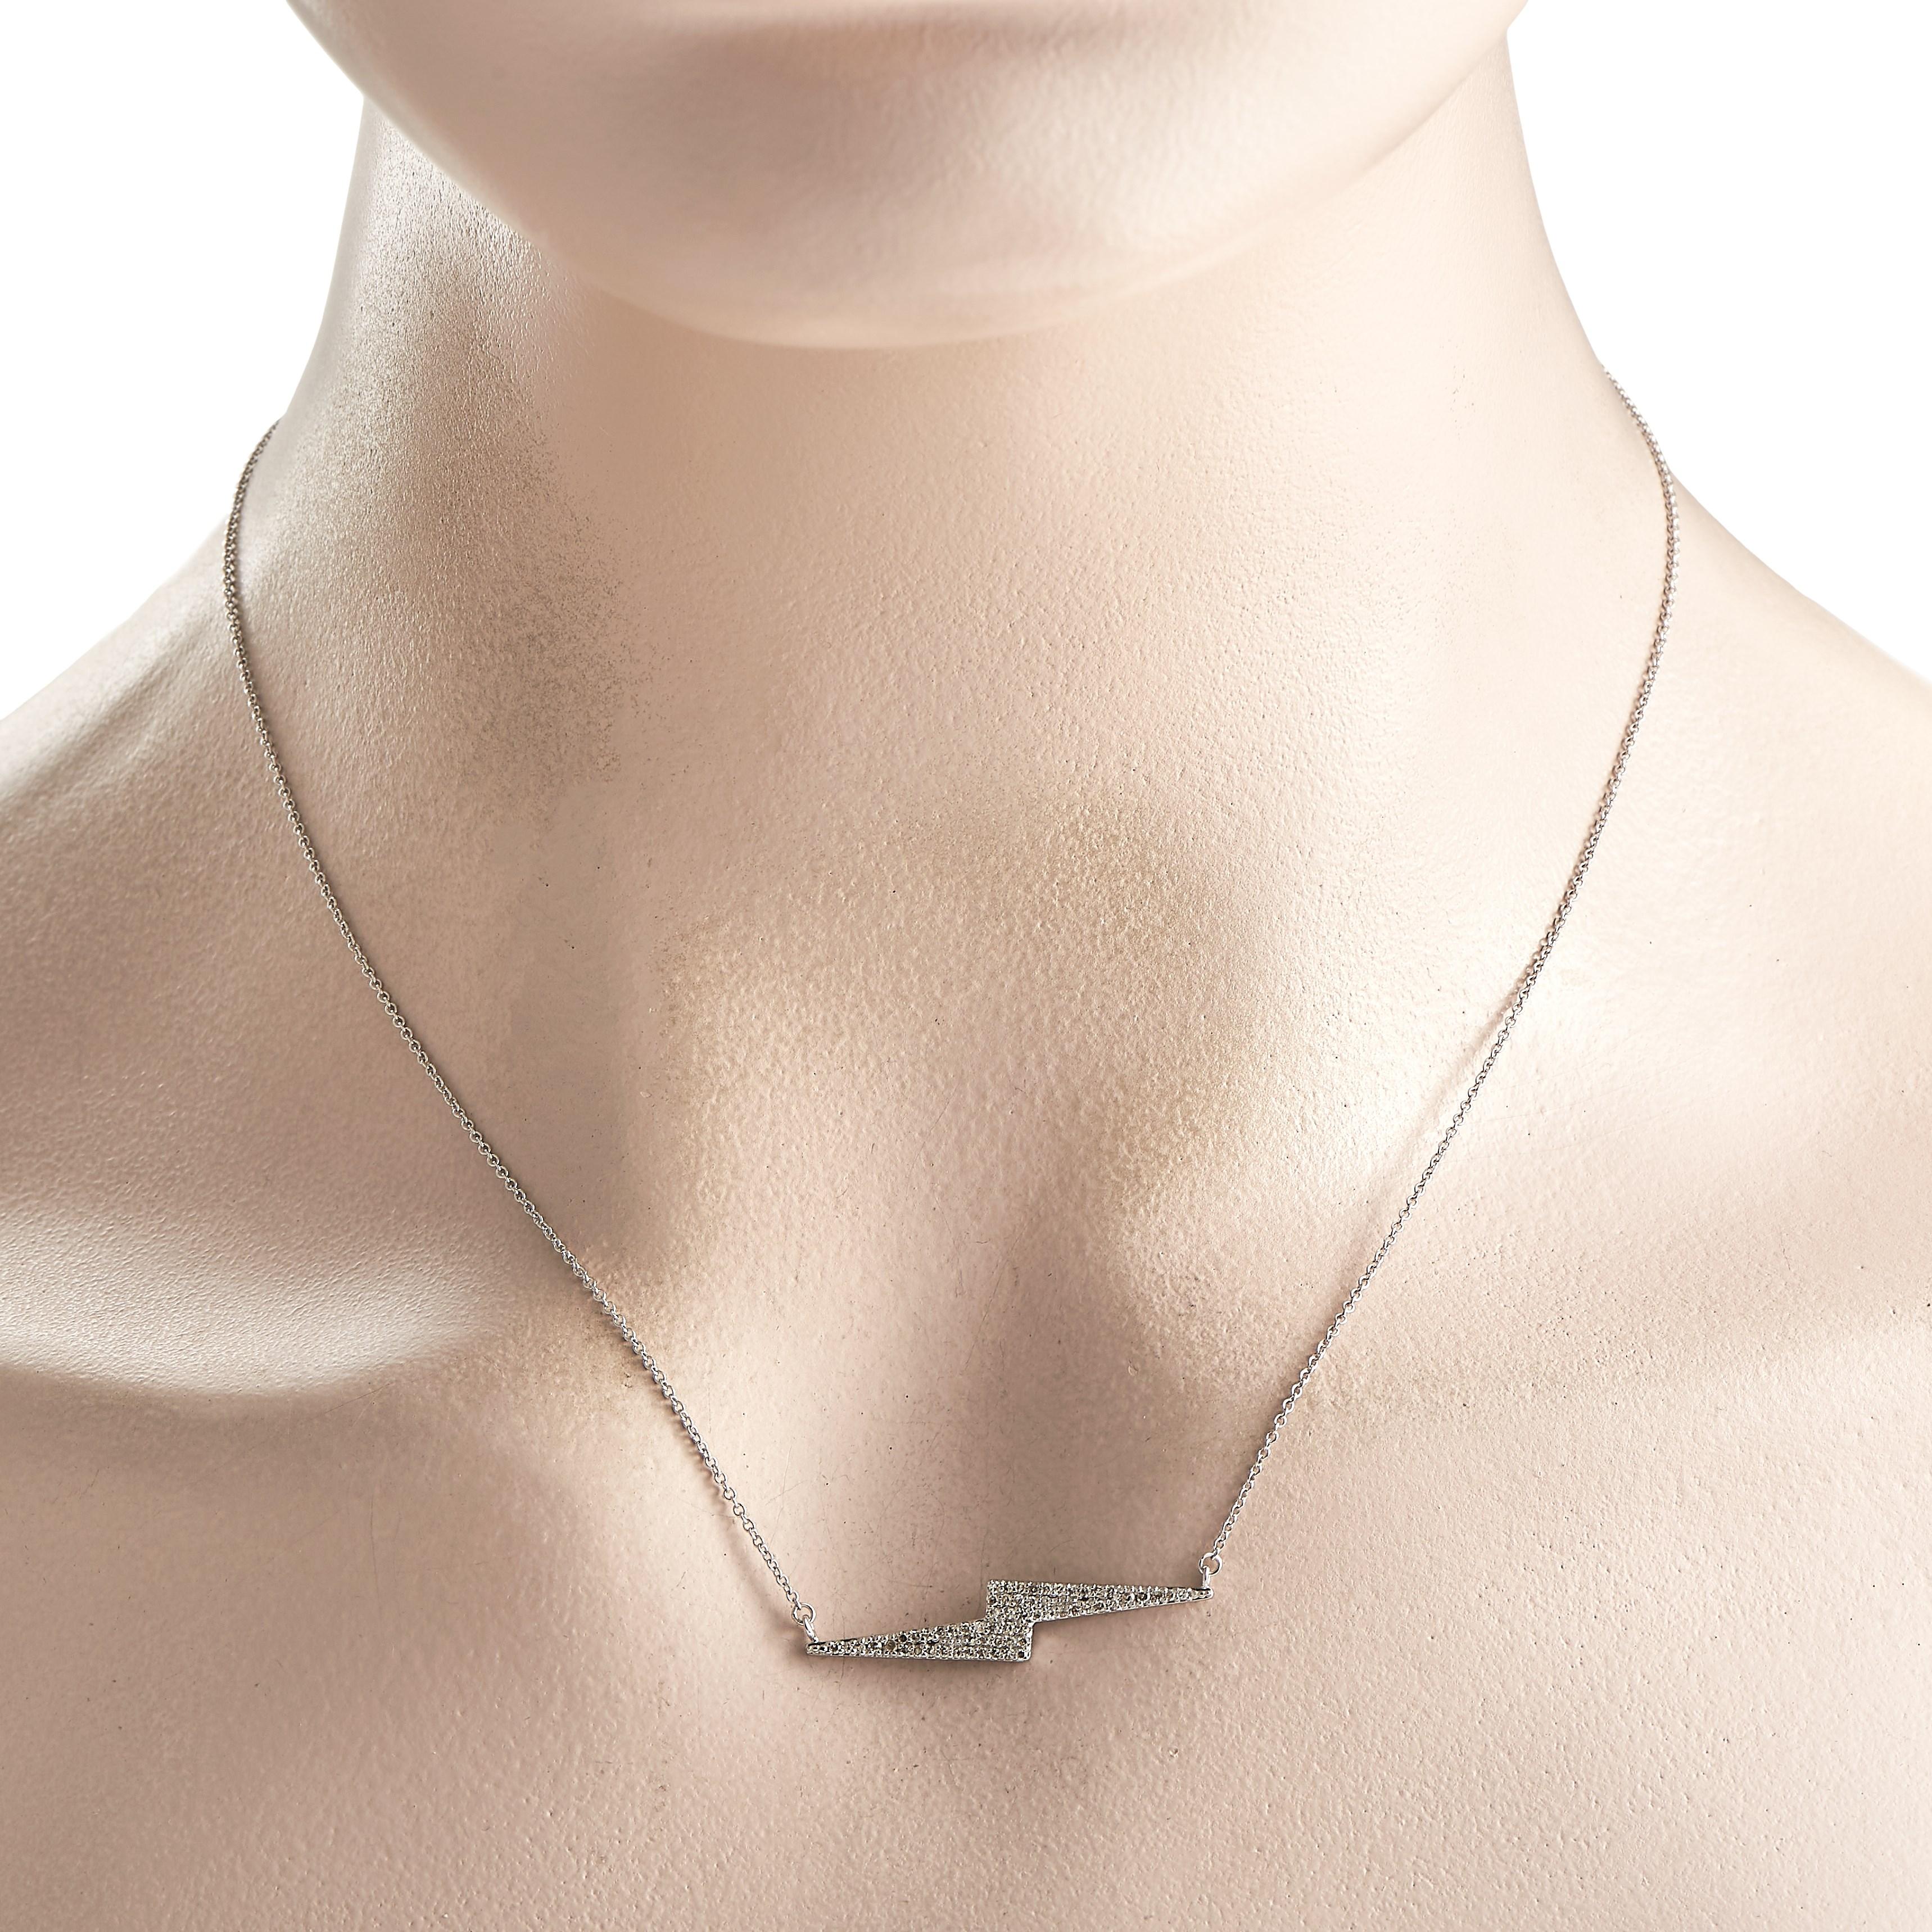 Just the spark your style needs. Turn to this trendy lightning bolt necklace to freshen up a basic outfit. It is crafted in 14K white gold and has a 16 chain holding a 0.25 x 1.25 diamond-studded lightning bolt pendant.This brand new LB Exclusive